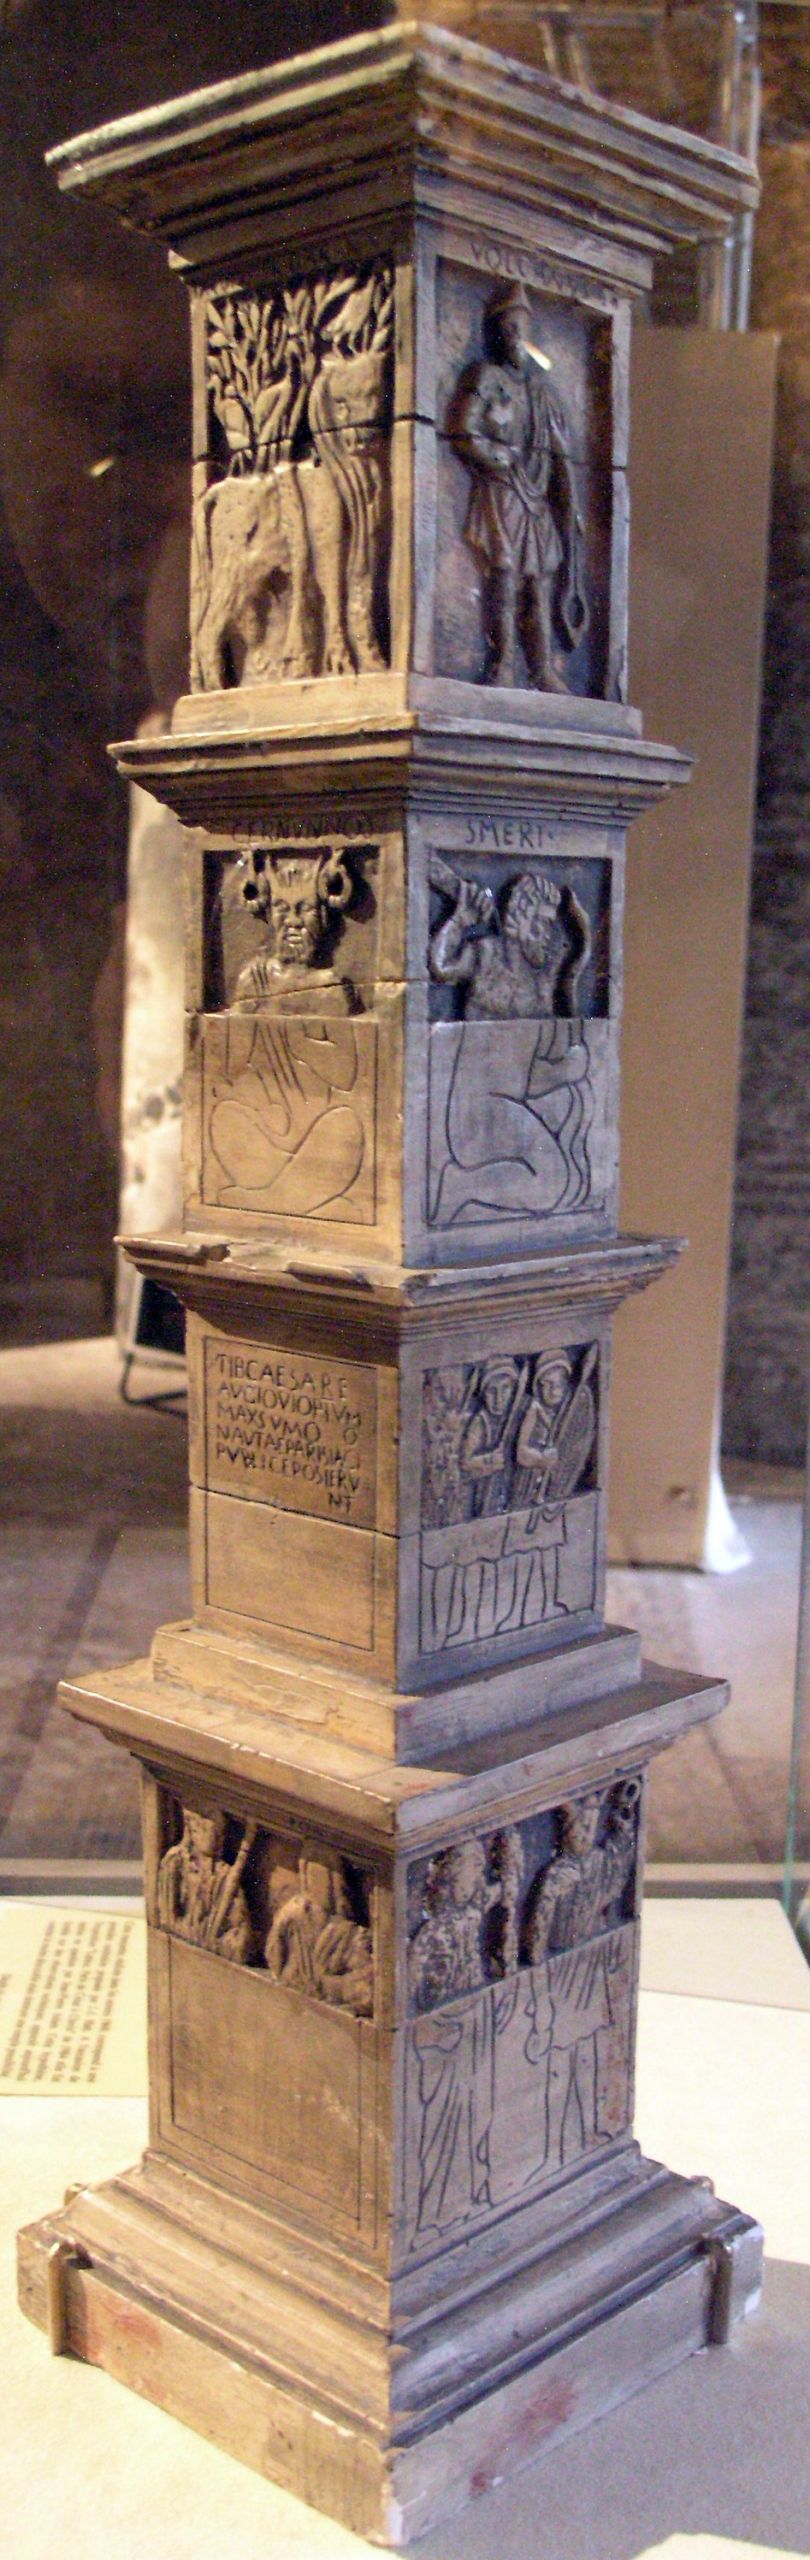 CLUNY Maquette pilier nautes 1 JPG